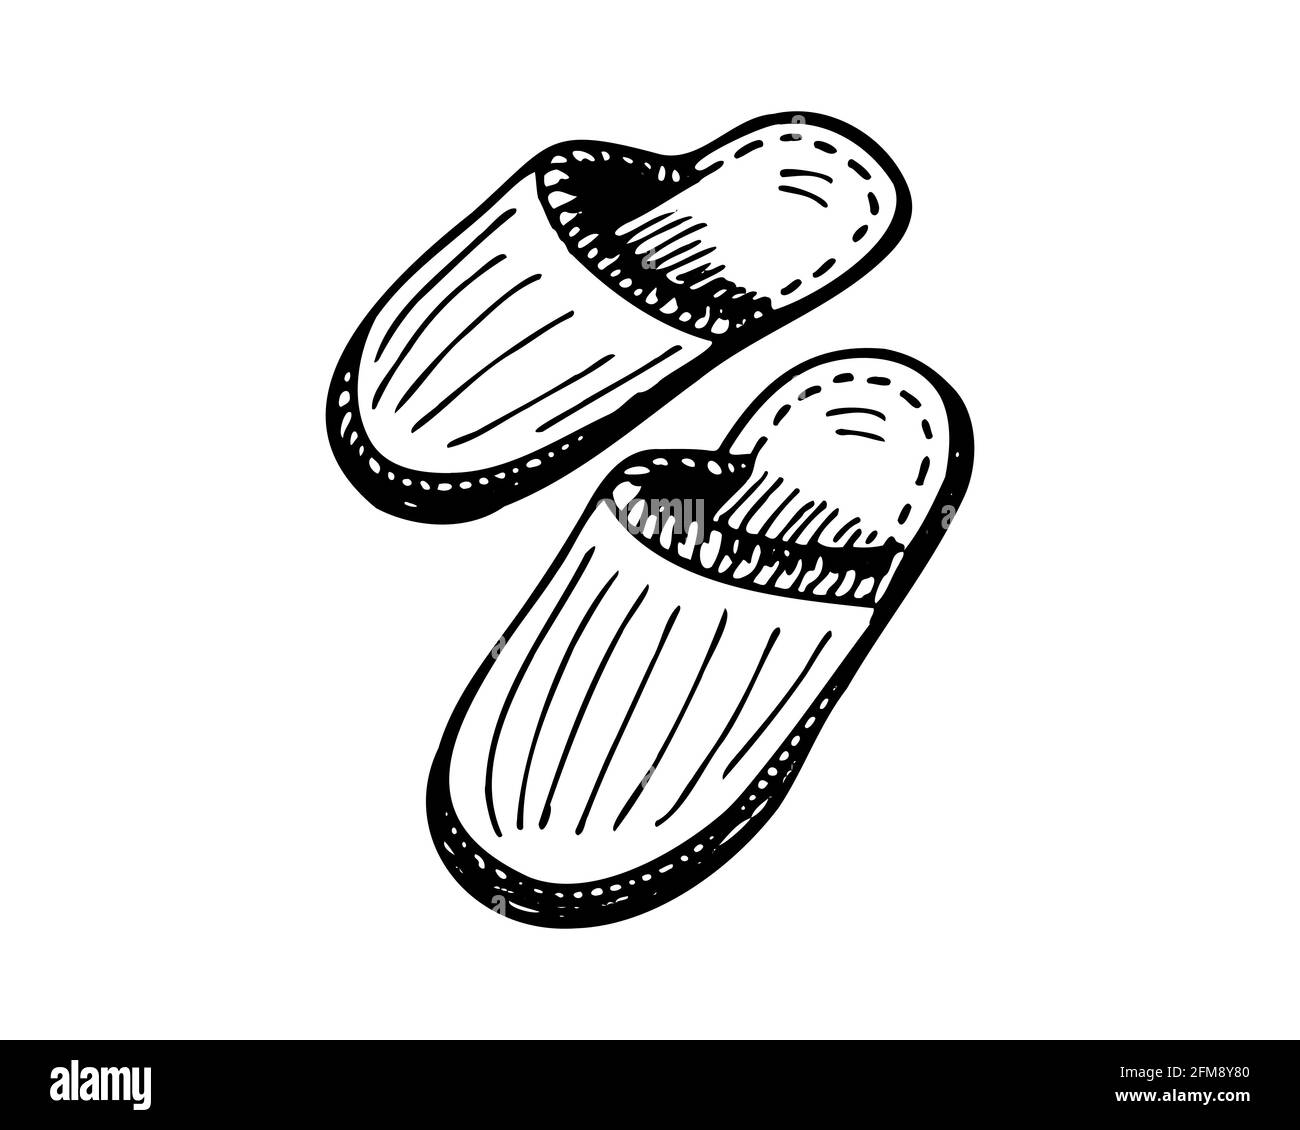 4000 Drawing Of Slipper Stock Photos Pictures  RoyaltyFree Images   iStock